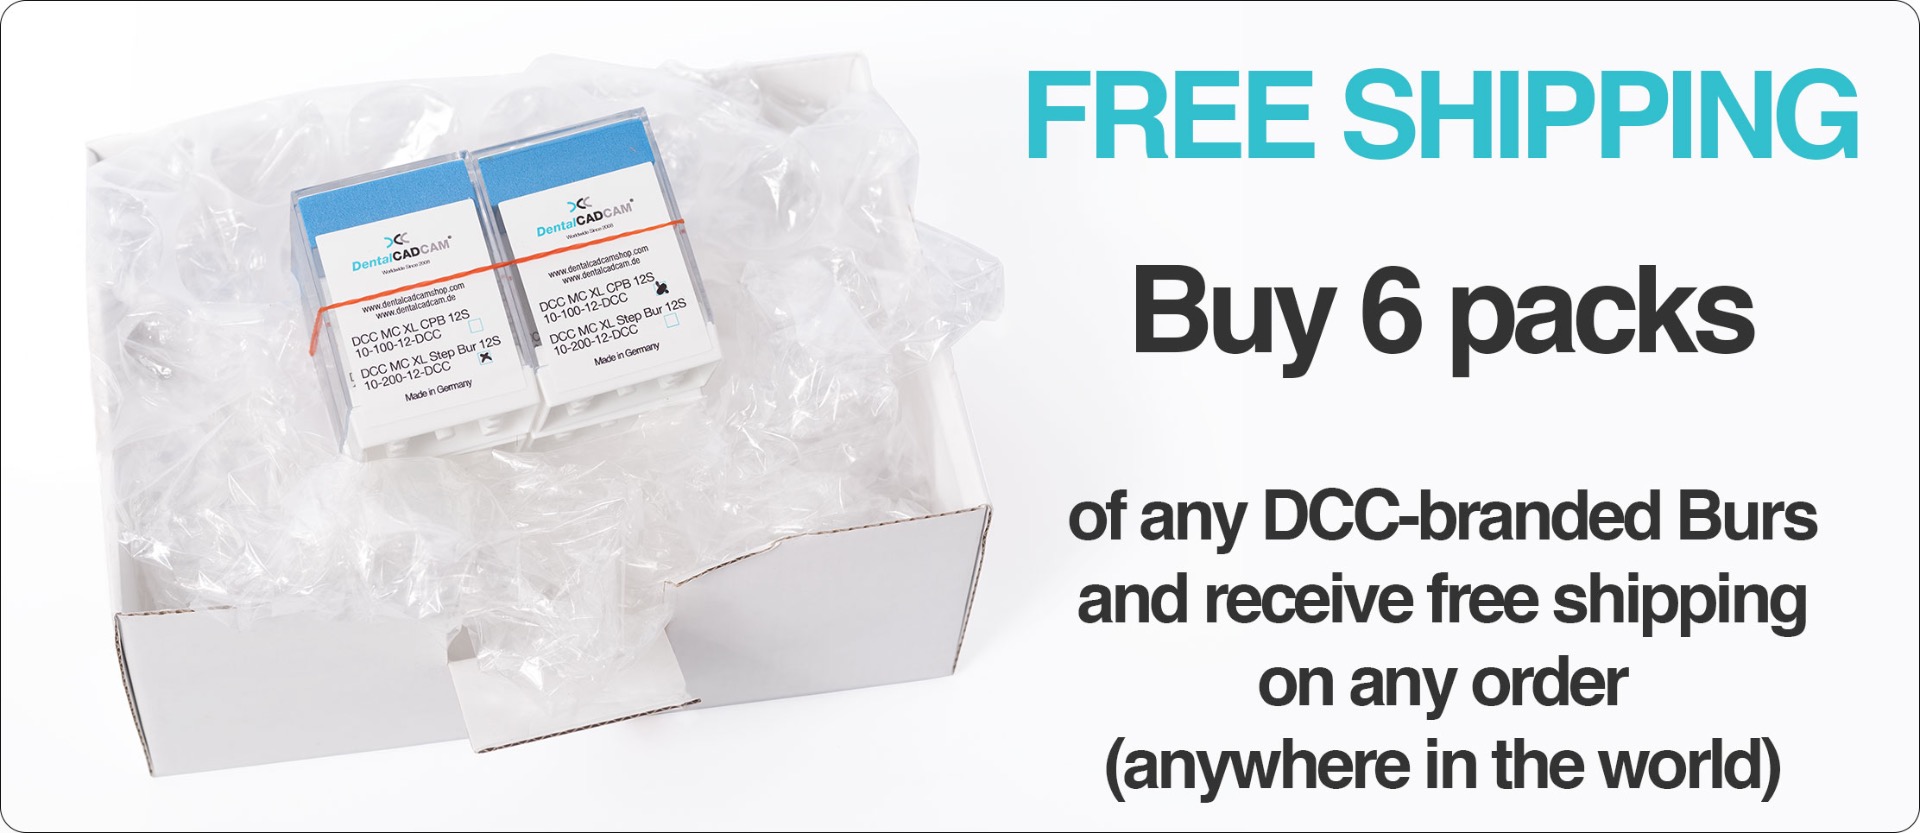 Free Shipping with DCC Burs